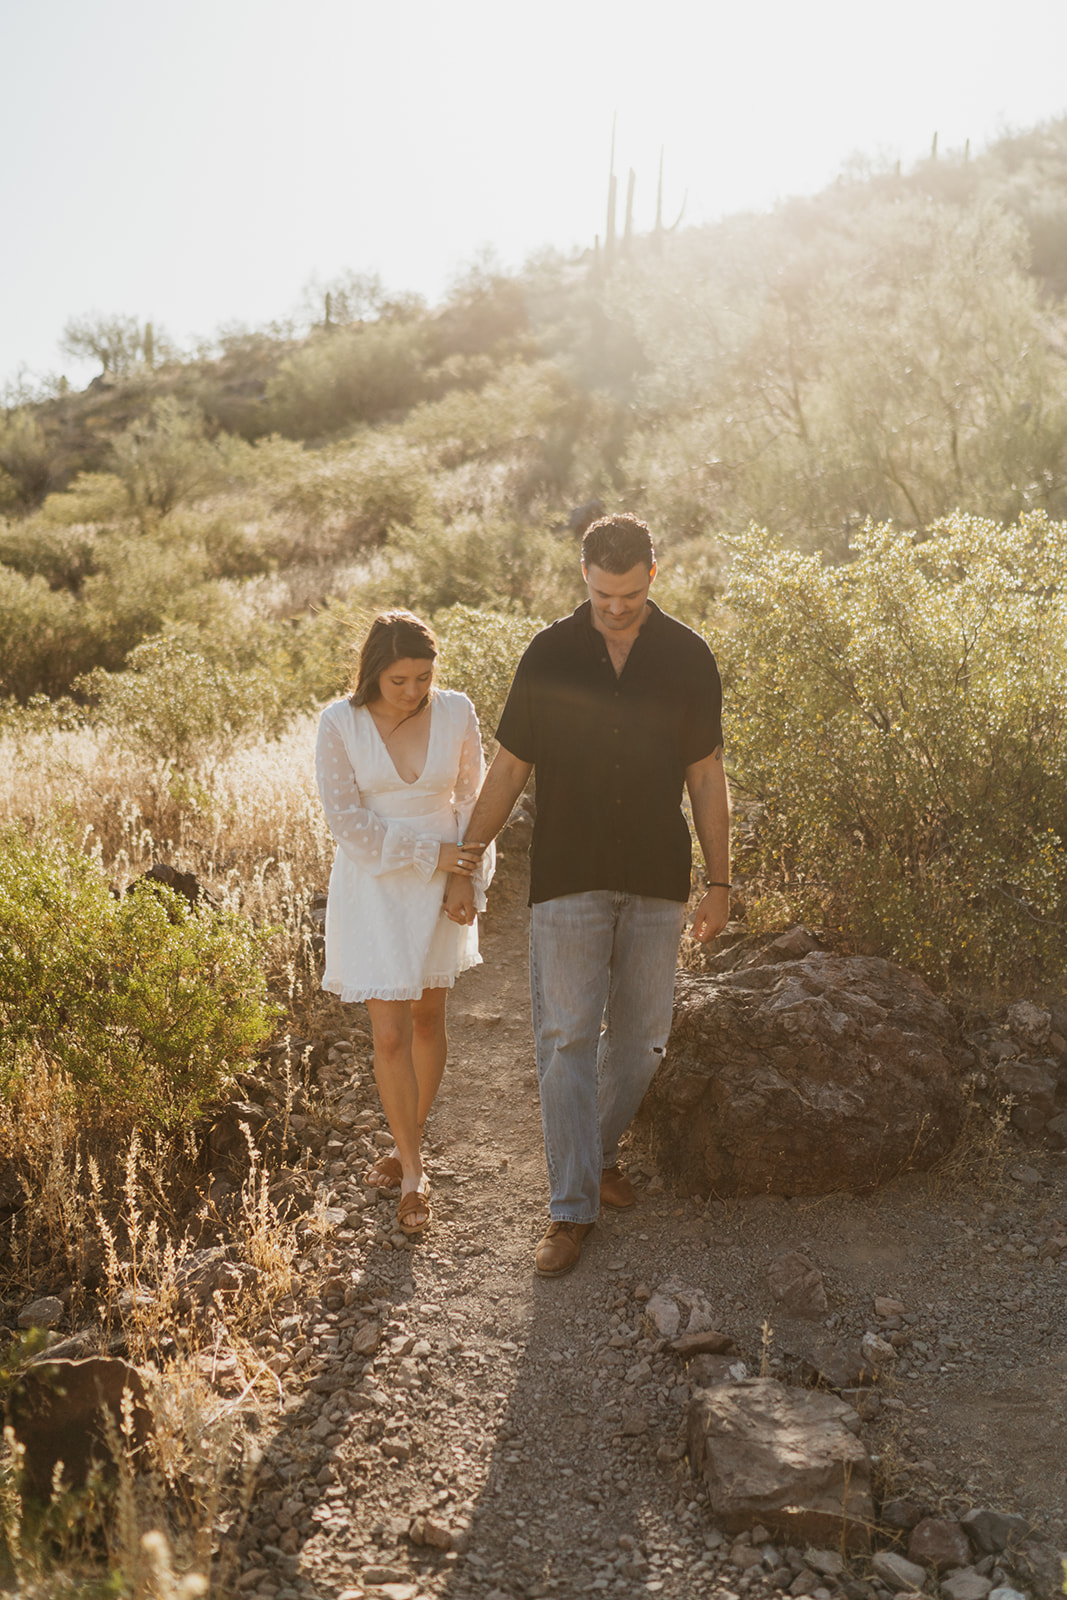 A couple at Picacho Peak State Park celebrating their wedding anniversary